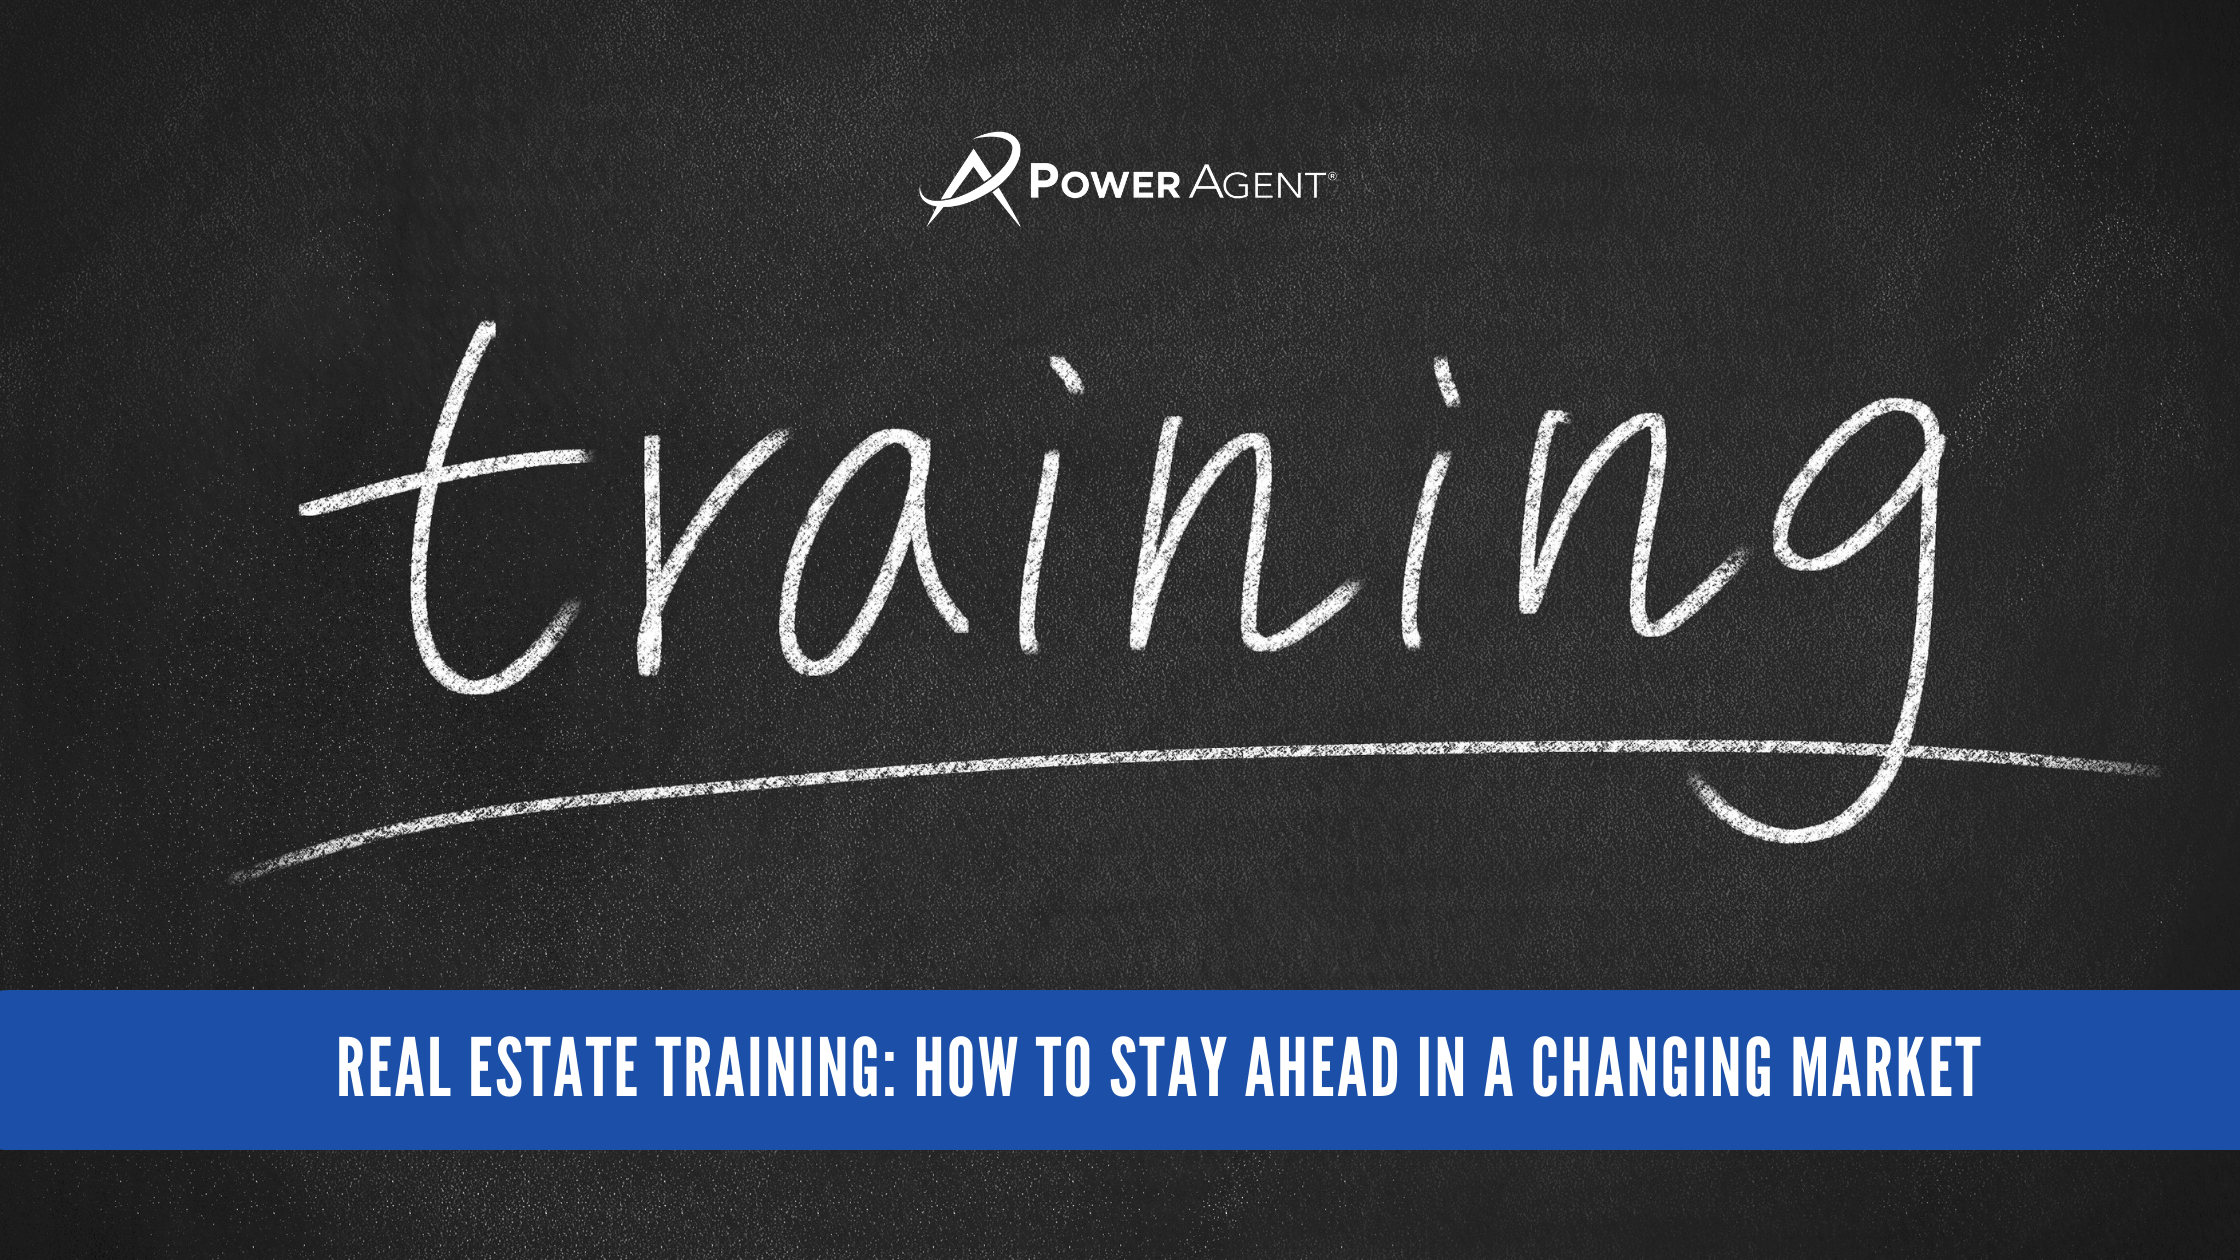 Real Estate Training: How to Stay Ahead in a Changing Market